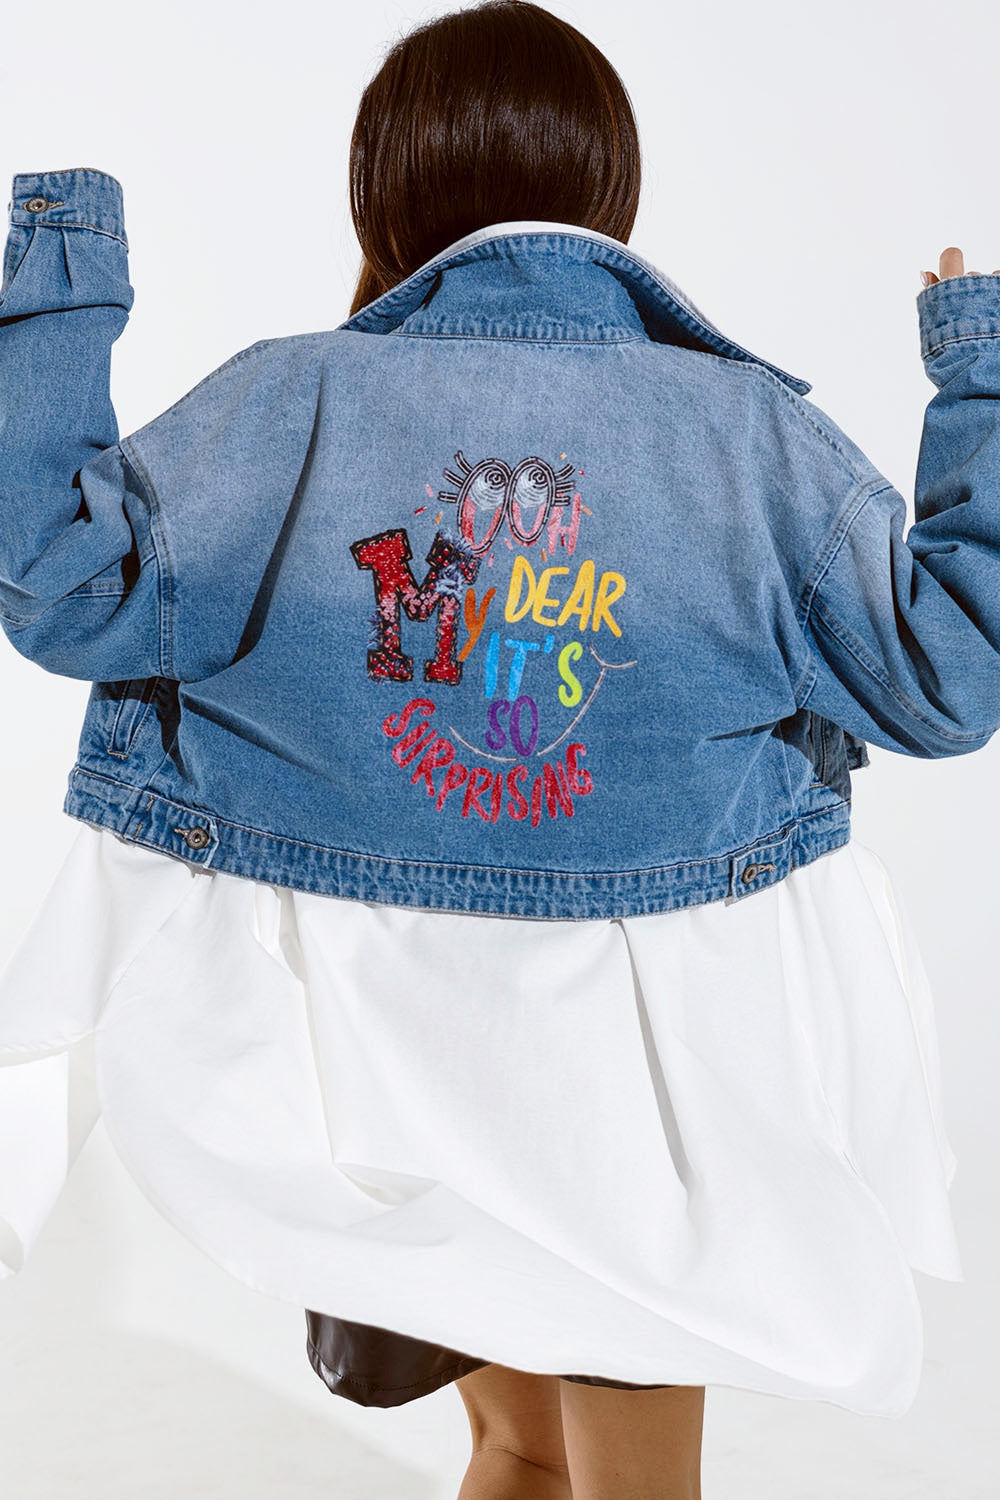 Q2 Cropped Denim Jacket with zipper closure and hand painted print at the  back